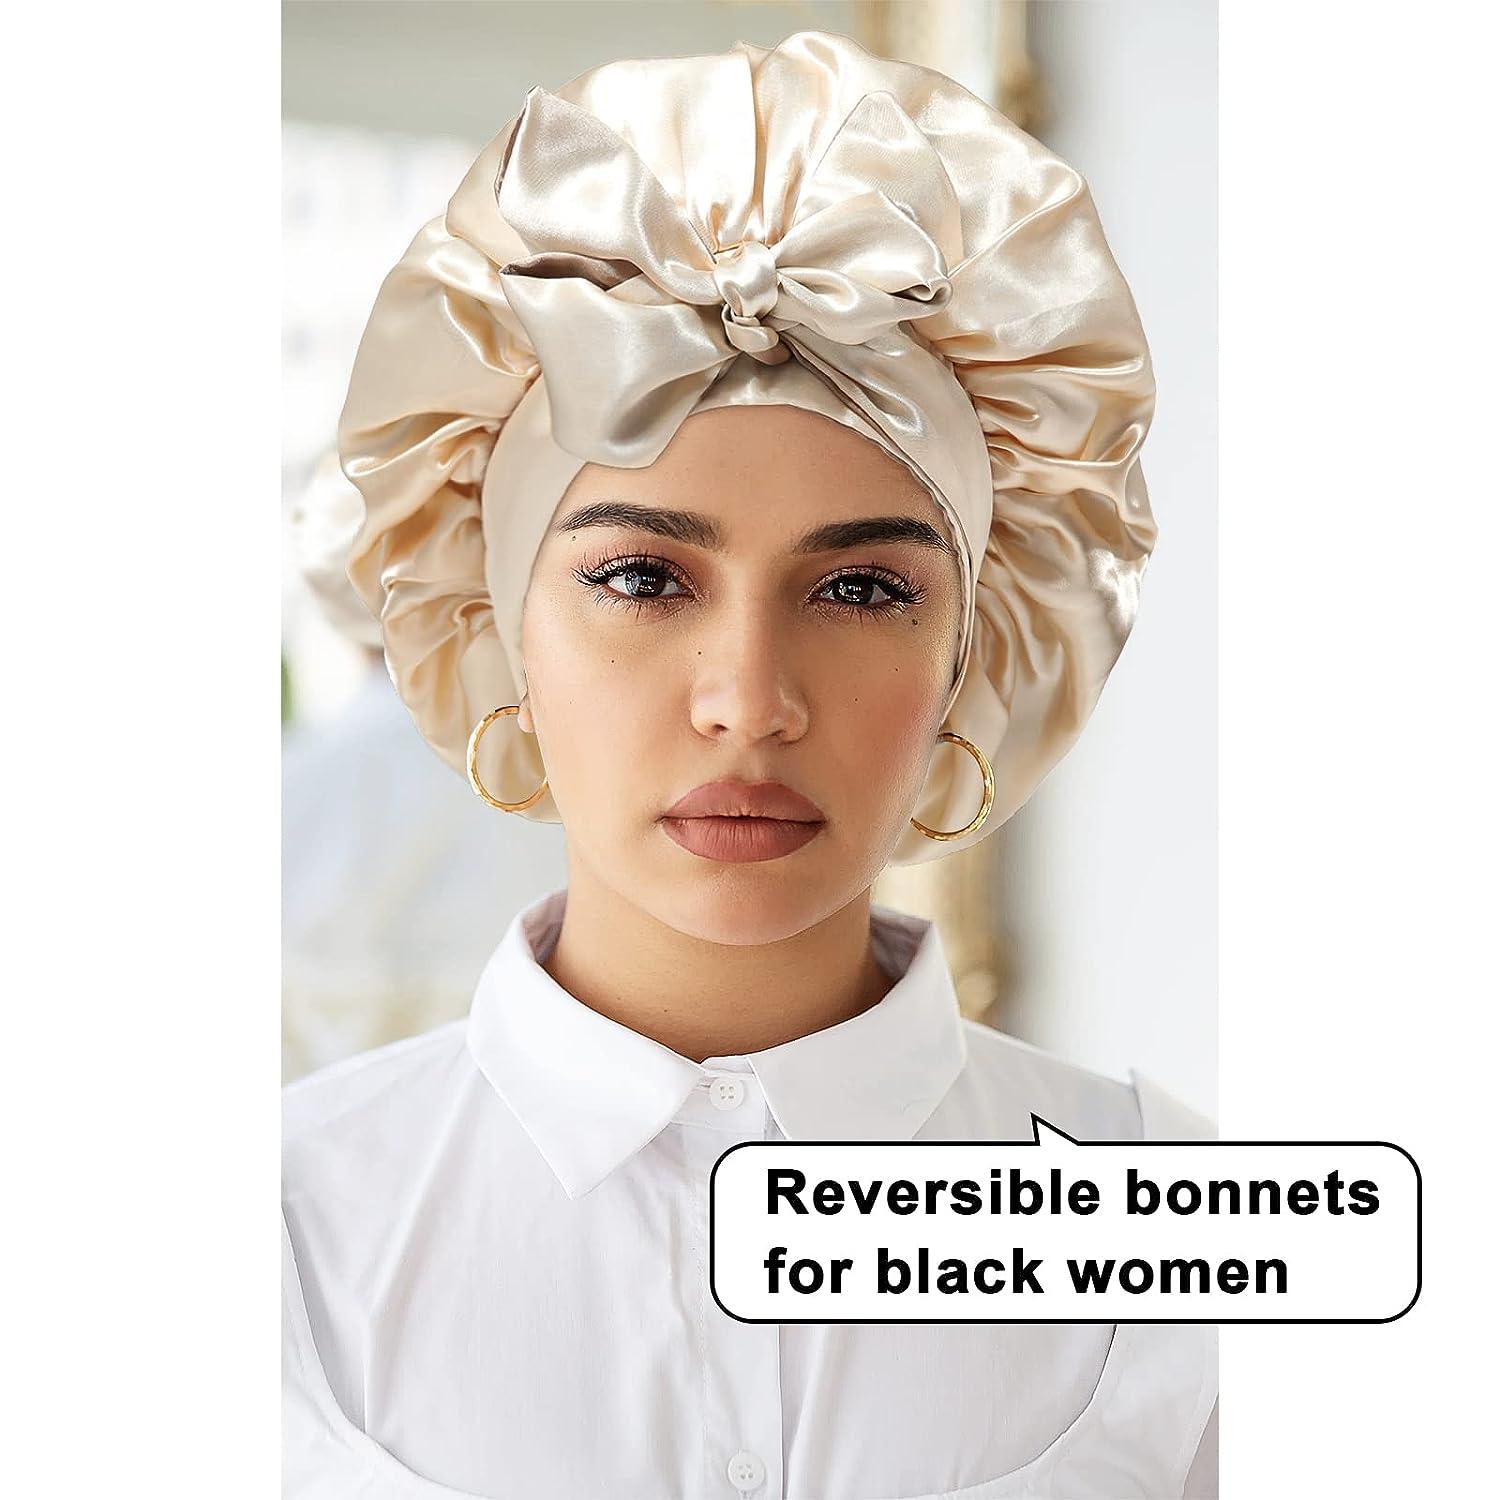 Satin Silk Hair Bonnet for Sleeping Large Bonnets with Tie Band Hair Wrap  with Adjustable Straps Hair Cap Night Sleep Caps for Women Curly Braid Hair